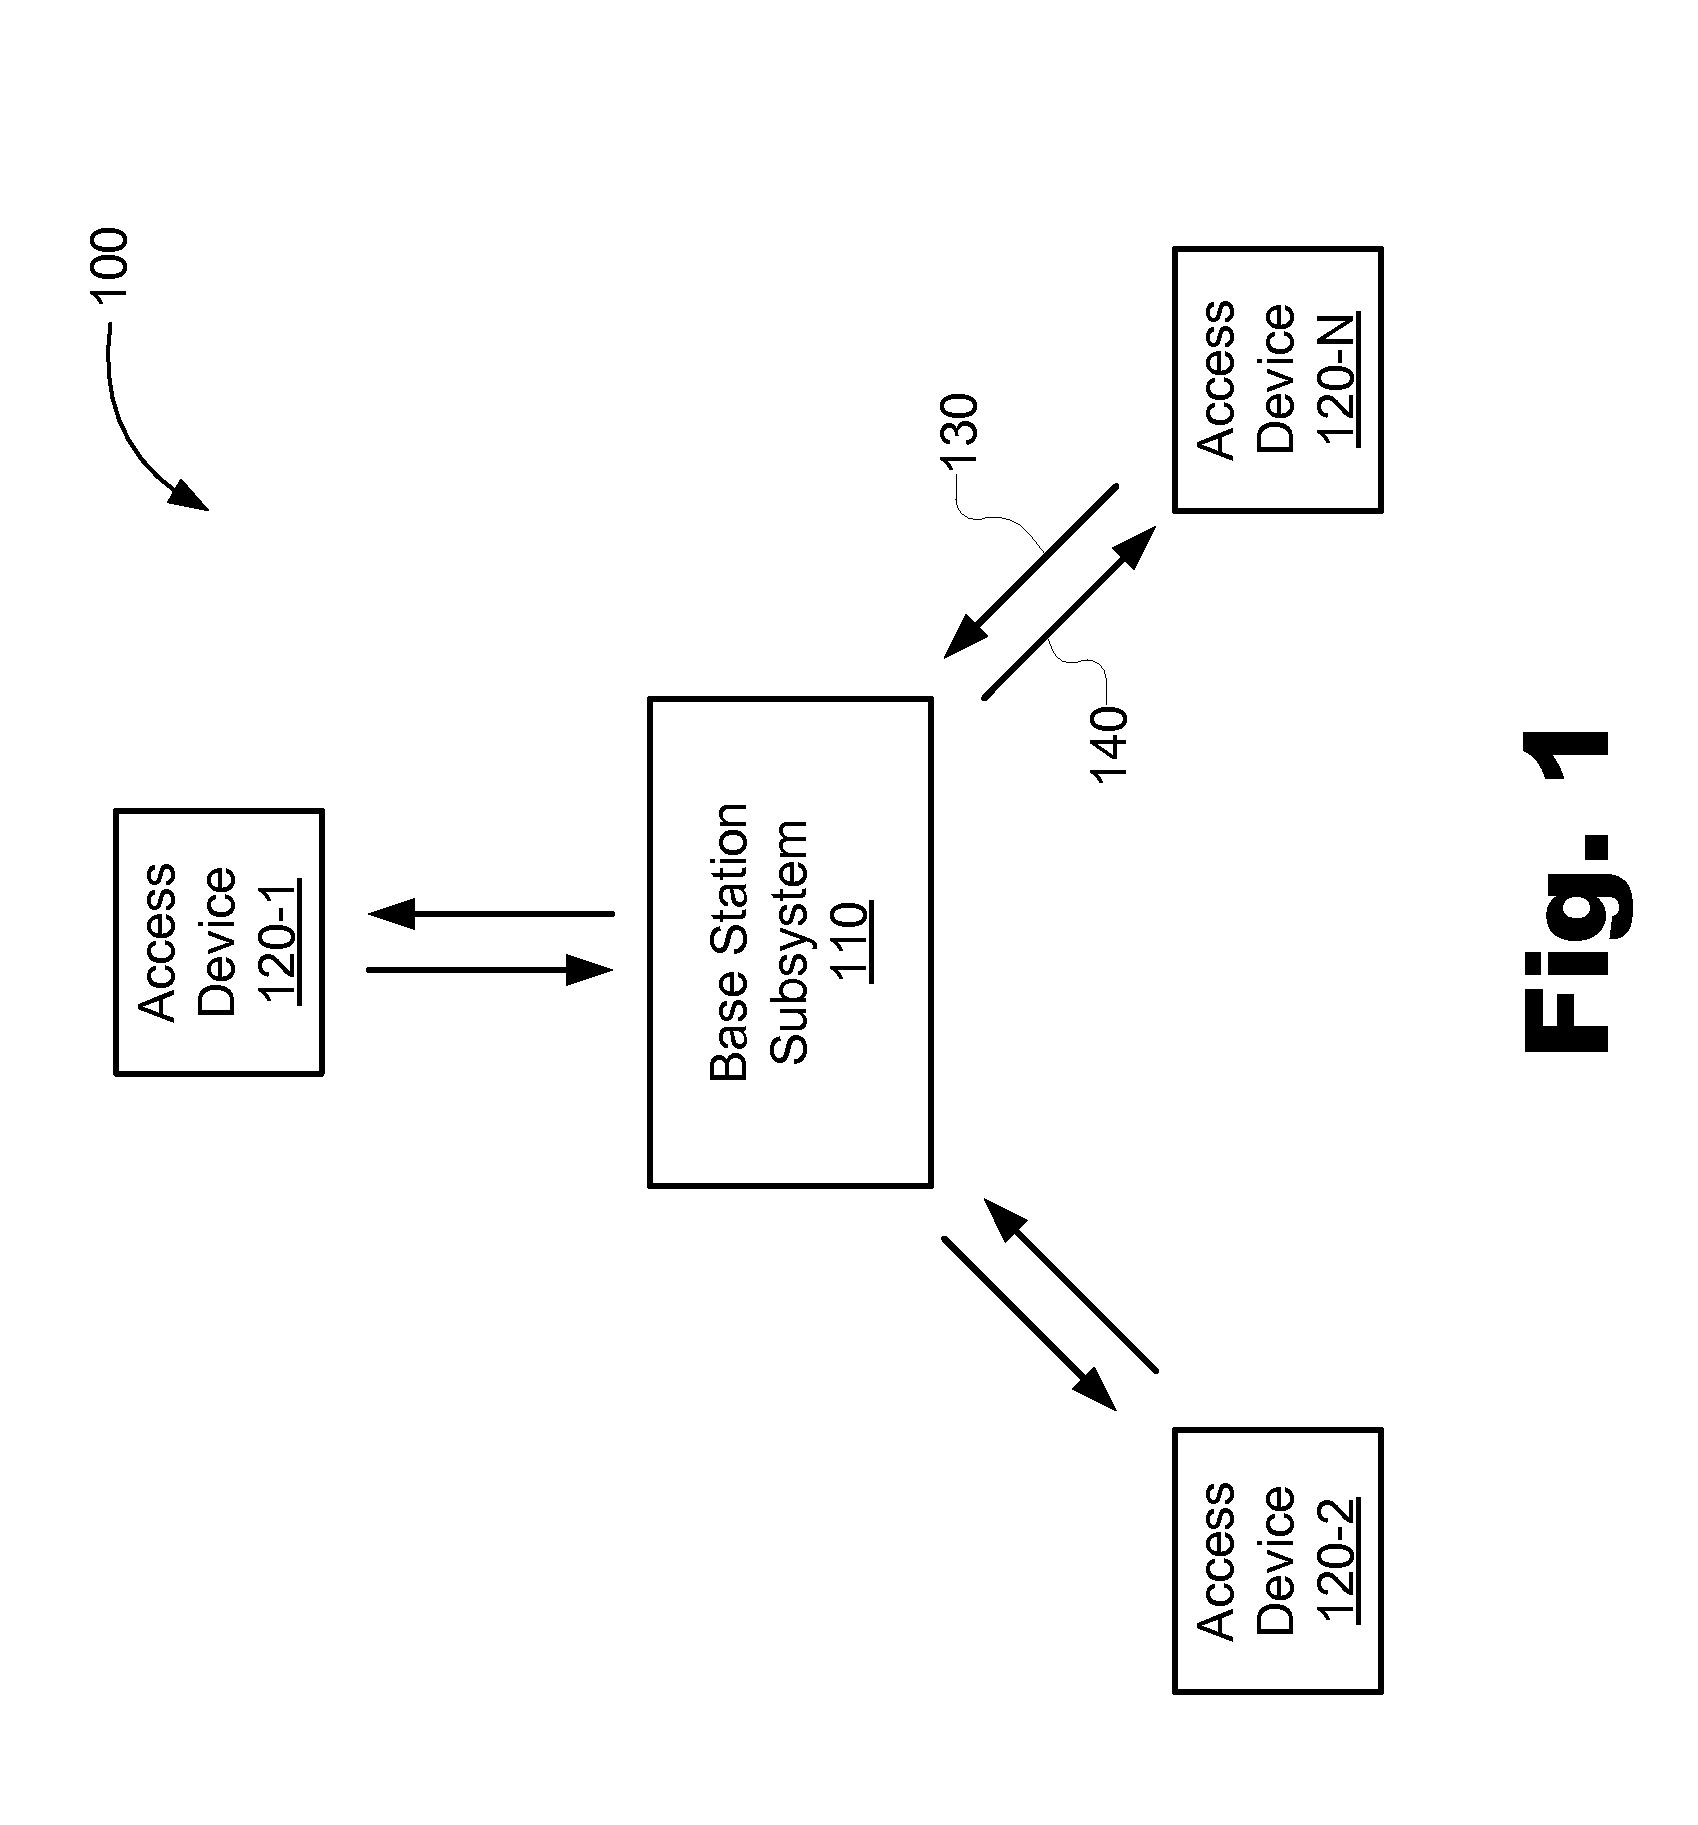 Apparatuses, systems, and methods for reducing spurious emissions resulting from carrier leakage